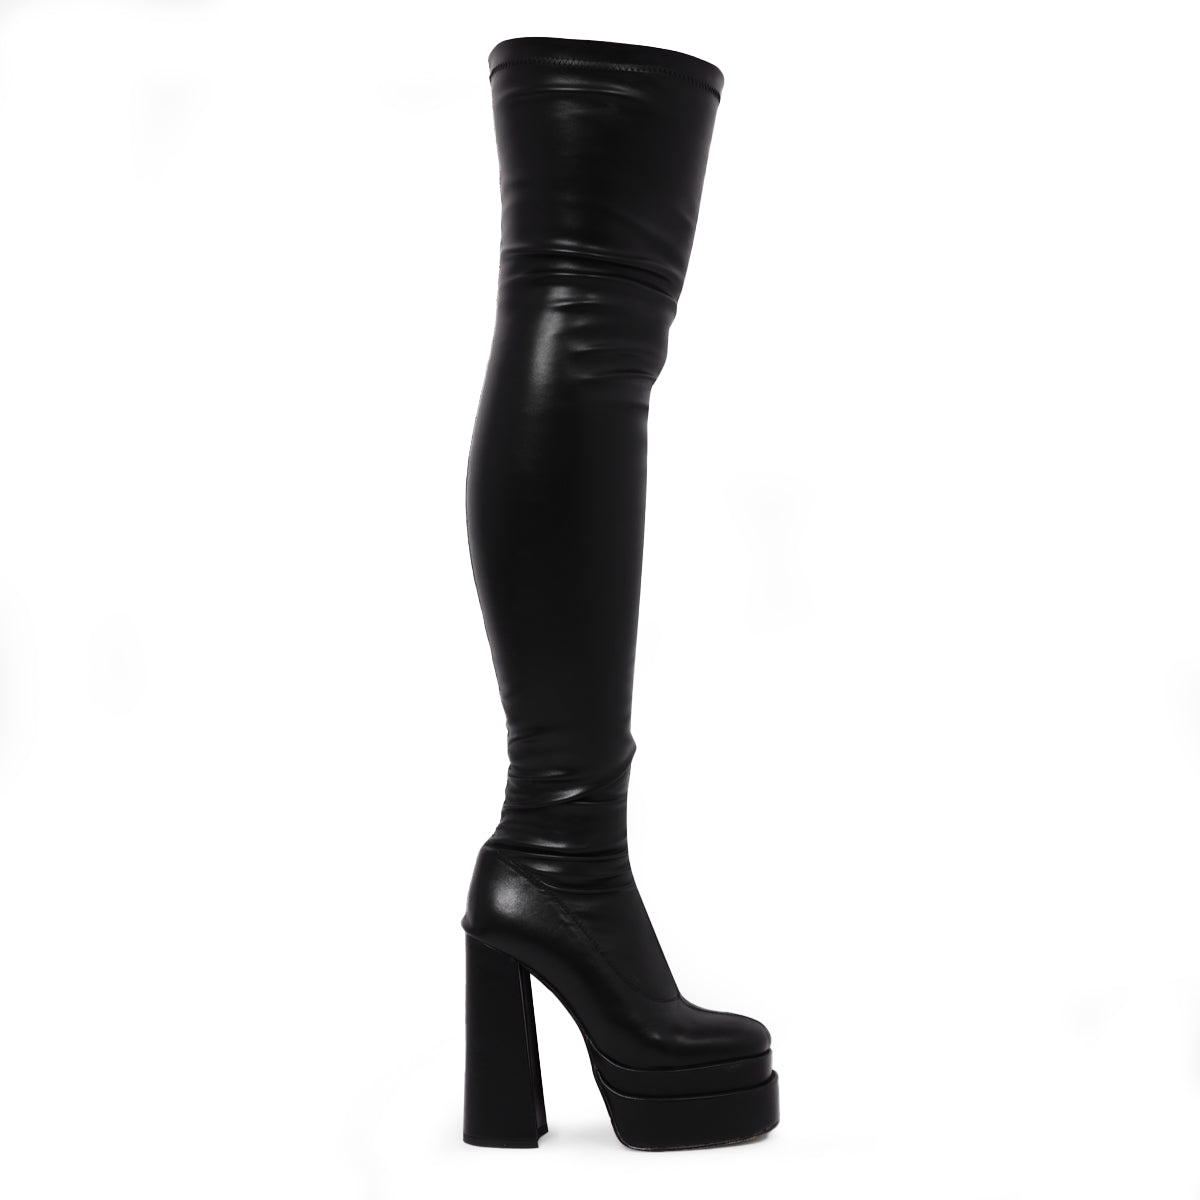 The Redemption Black Stretch Thigh High Boots – KOI footwear